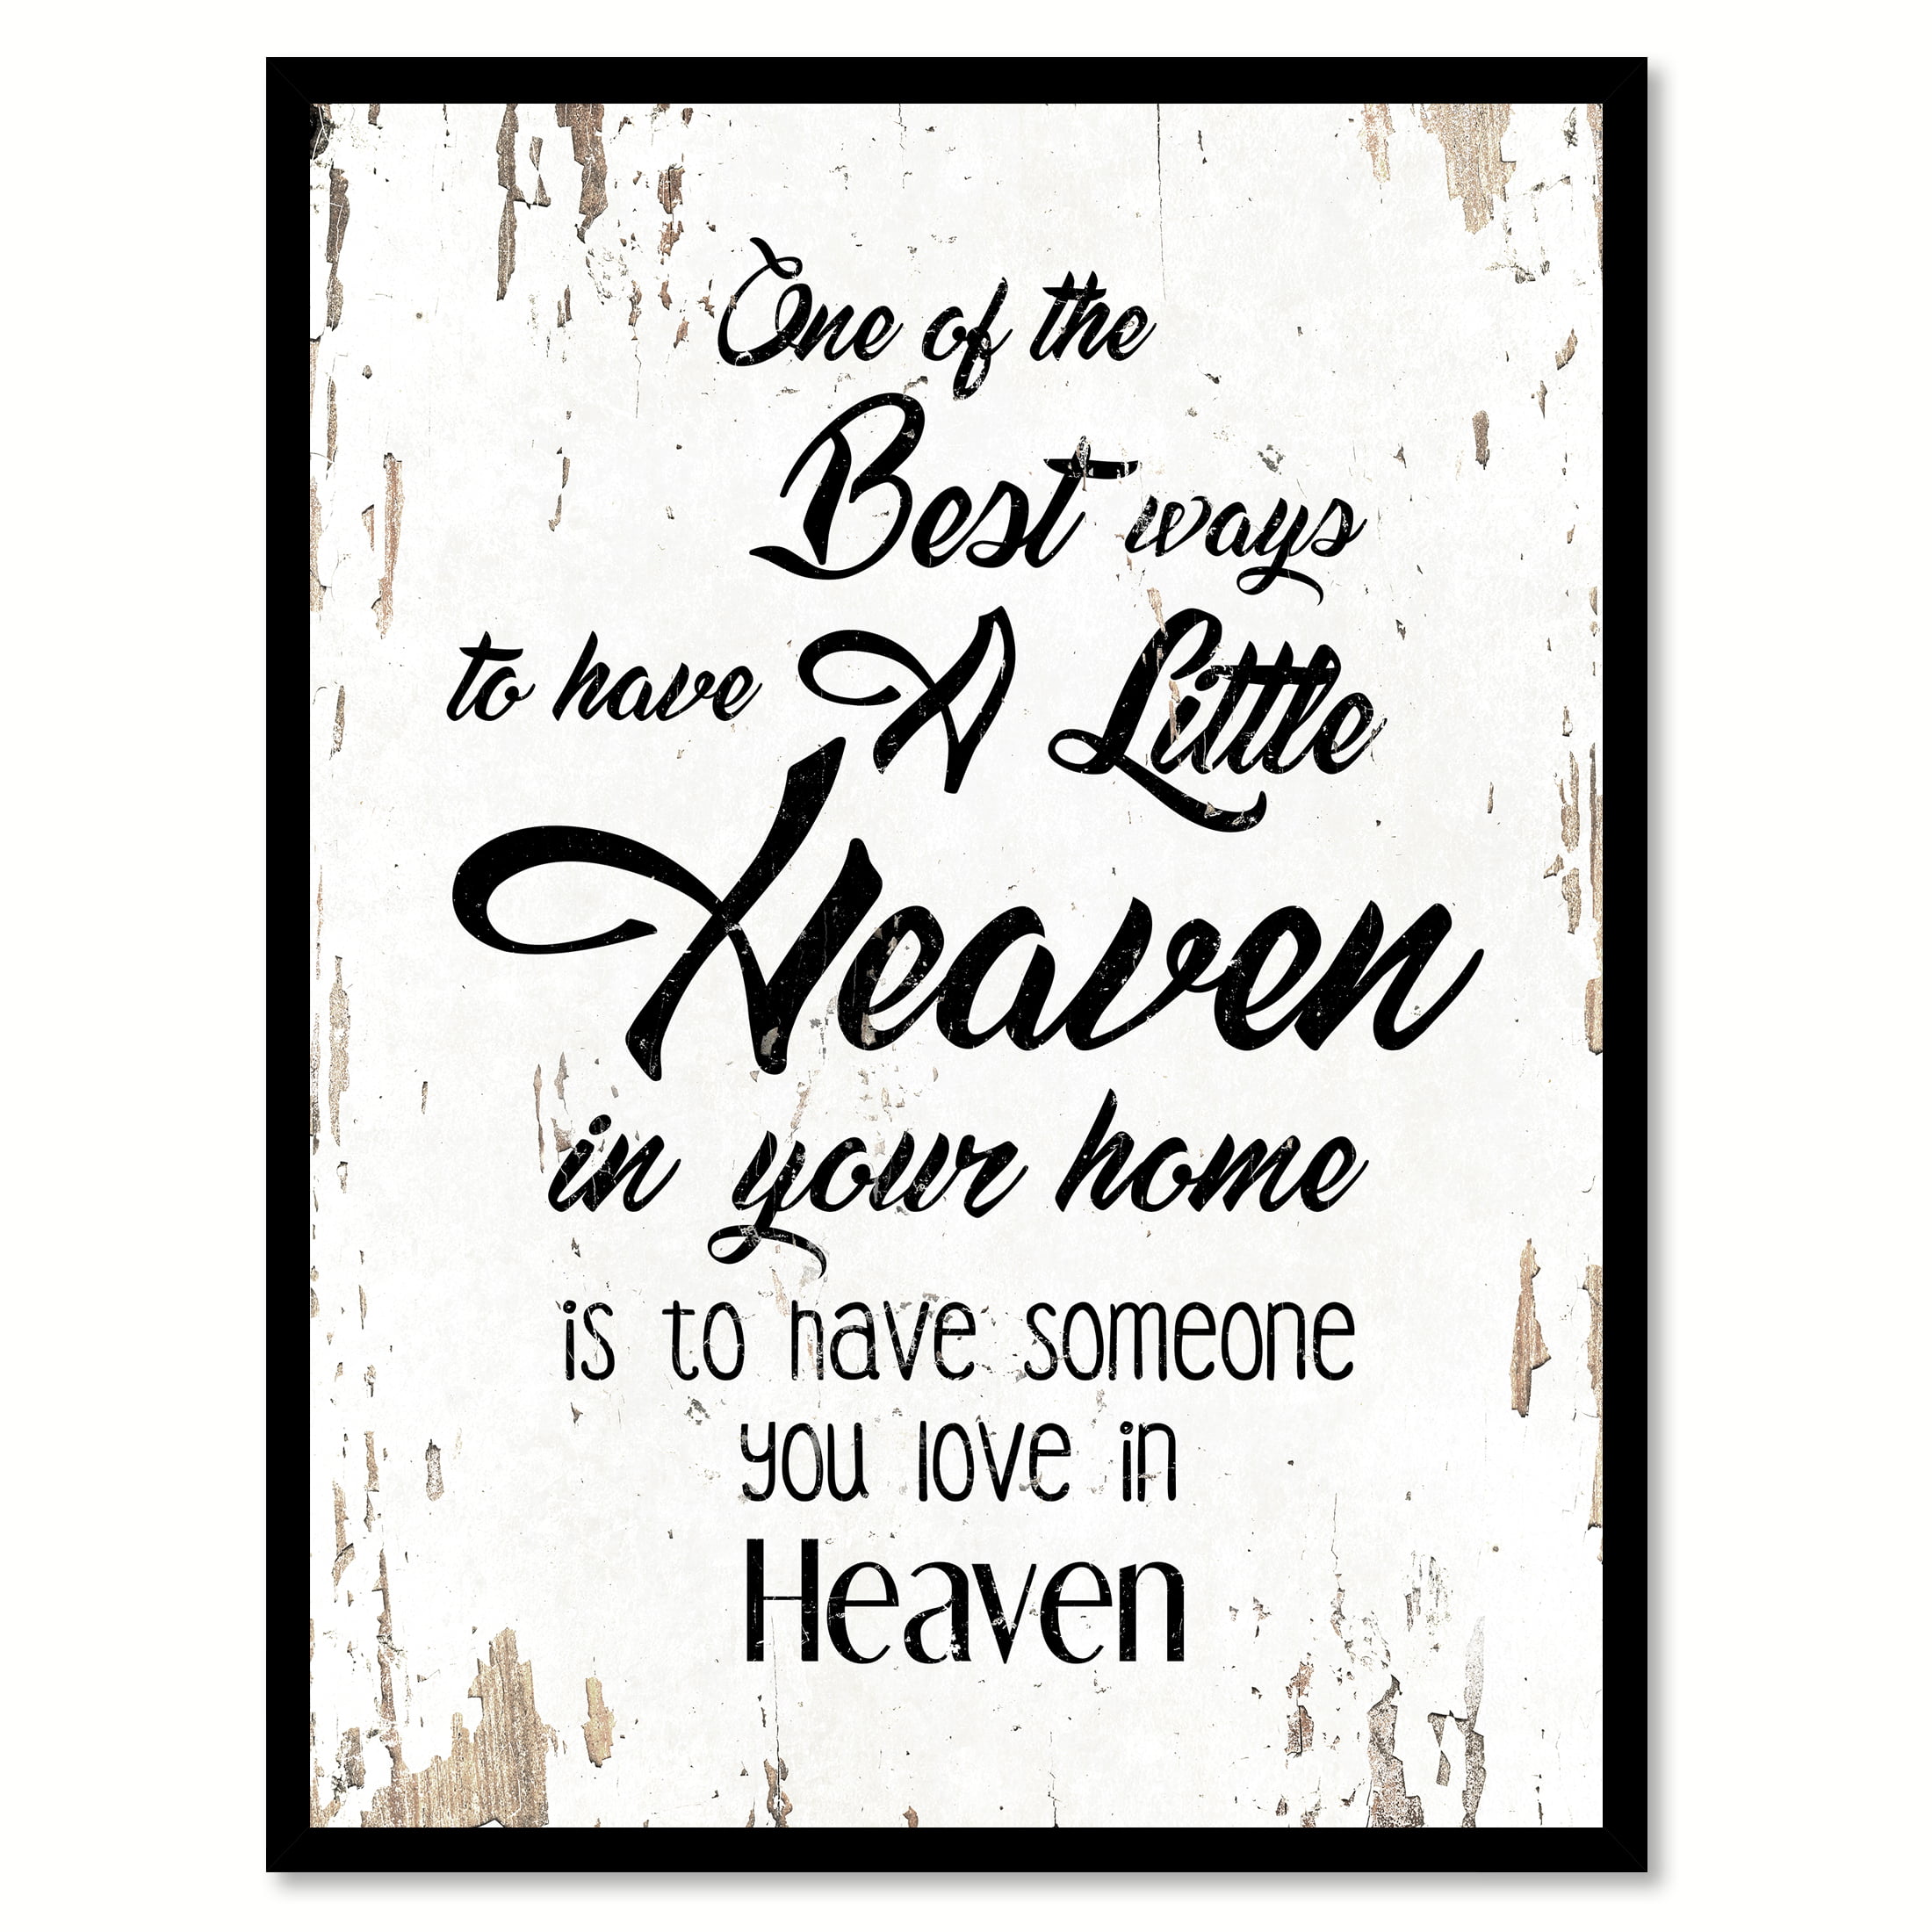 A Little Bit Of Heaven Quote Printed On Watercolour Design Poster For Home 